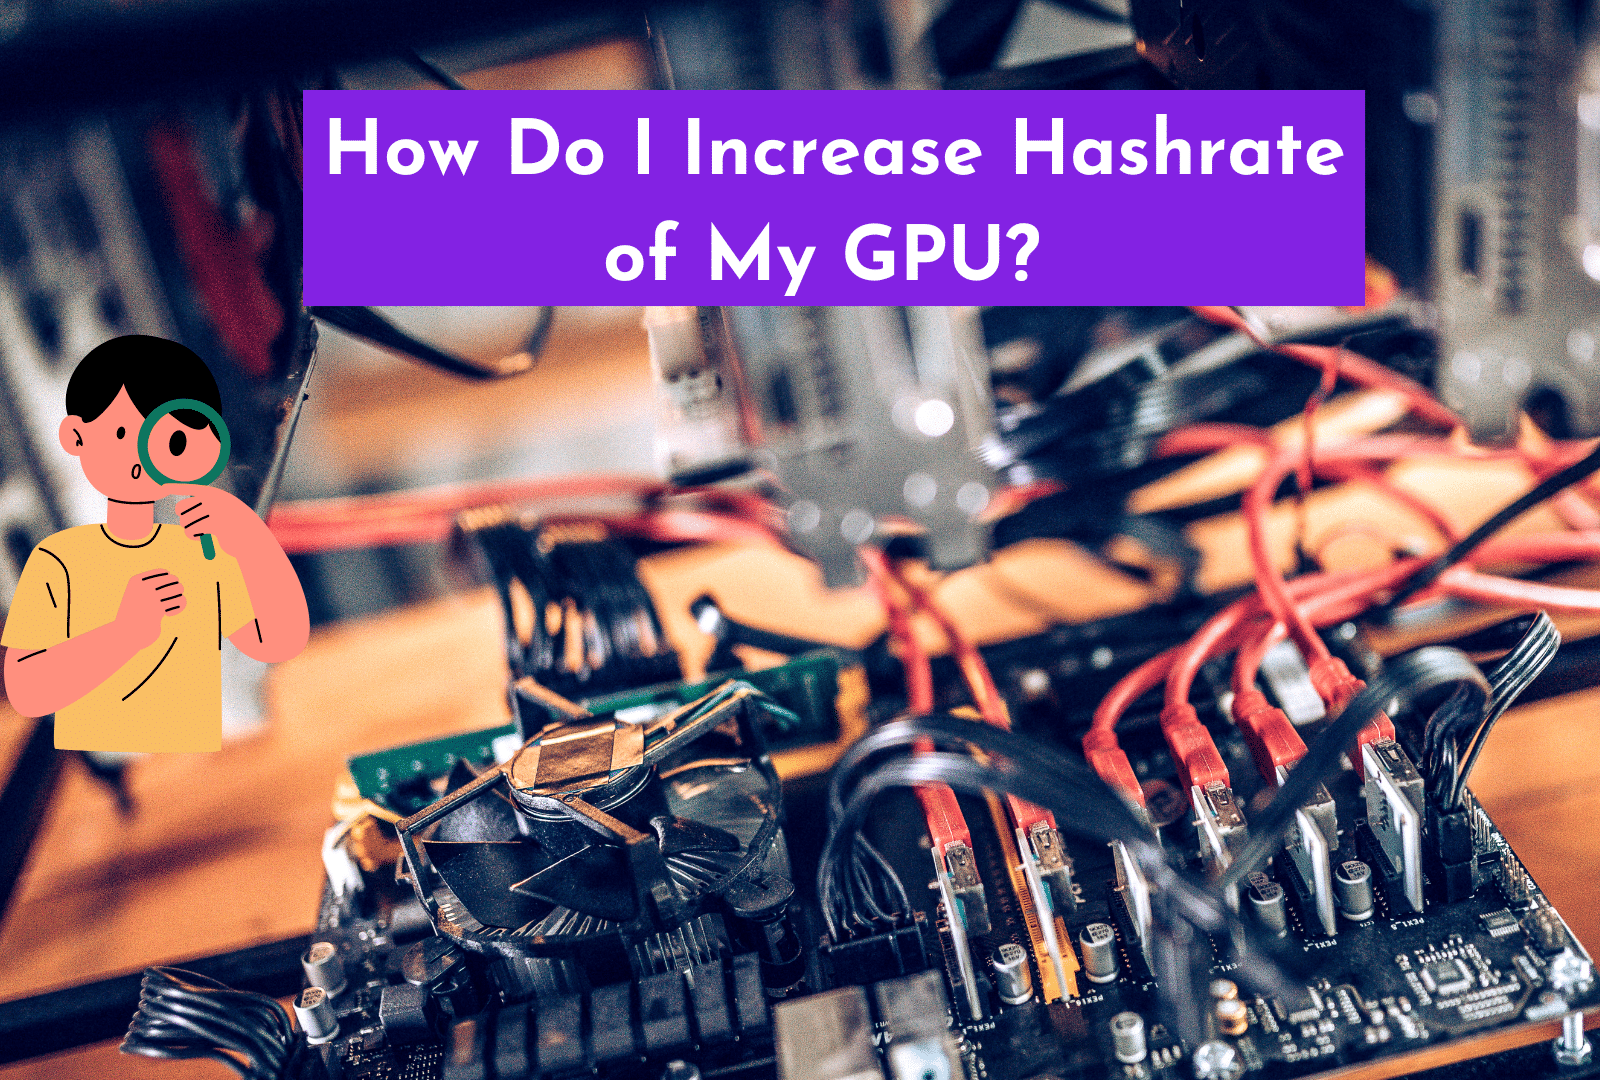 C:\Users\Mohsin\Downloads\Effective Methods to Increase Hashrate of Your GPU.png